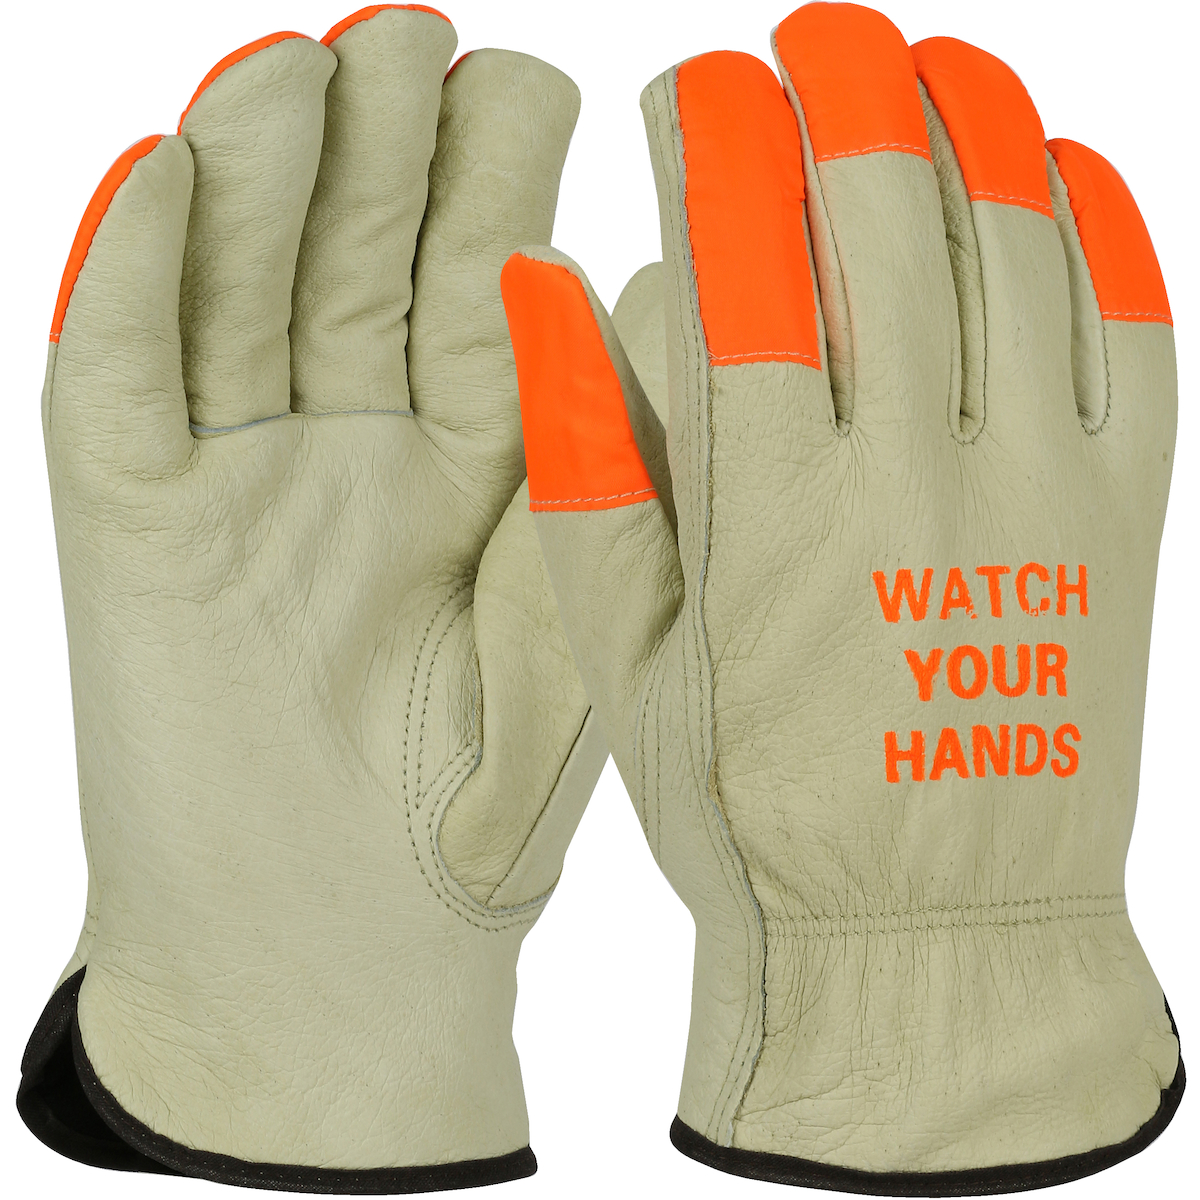 THERMAL PIGSKIN DRIVER WATCH YOUR HANDS - Lysol Disinfectant Spray